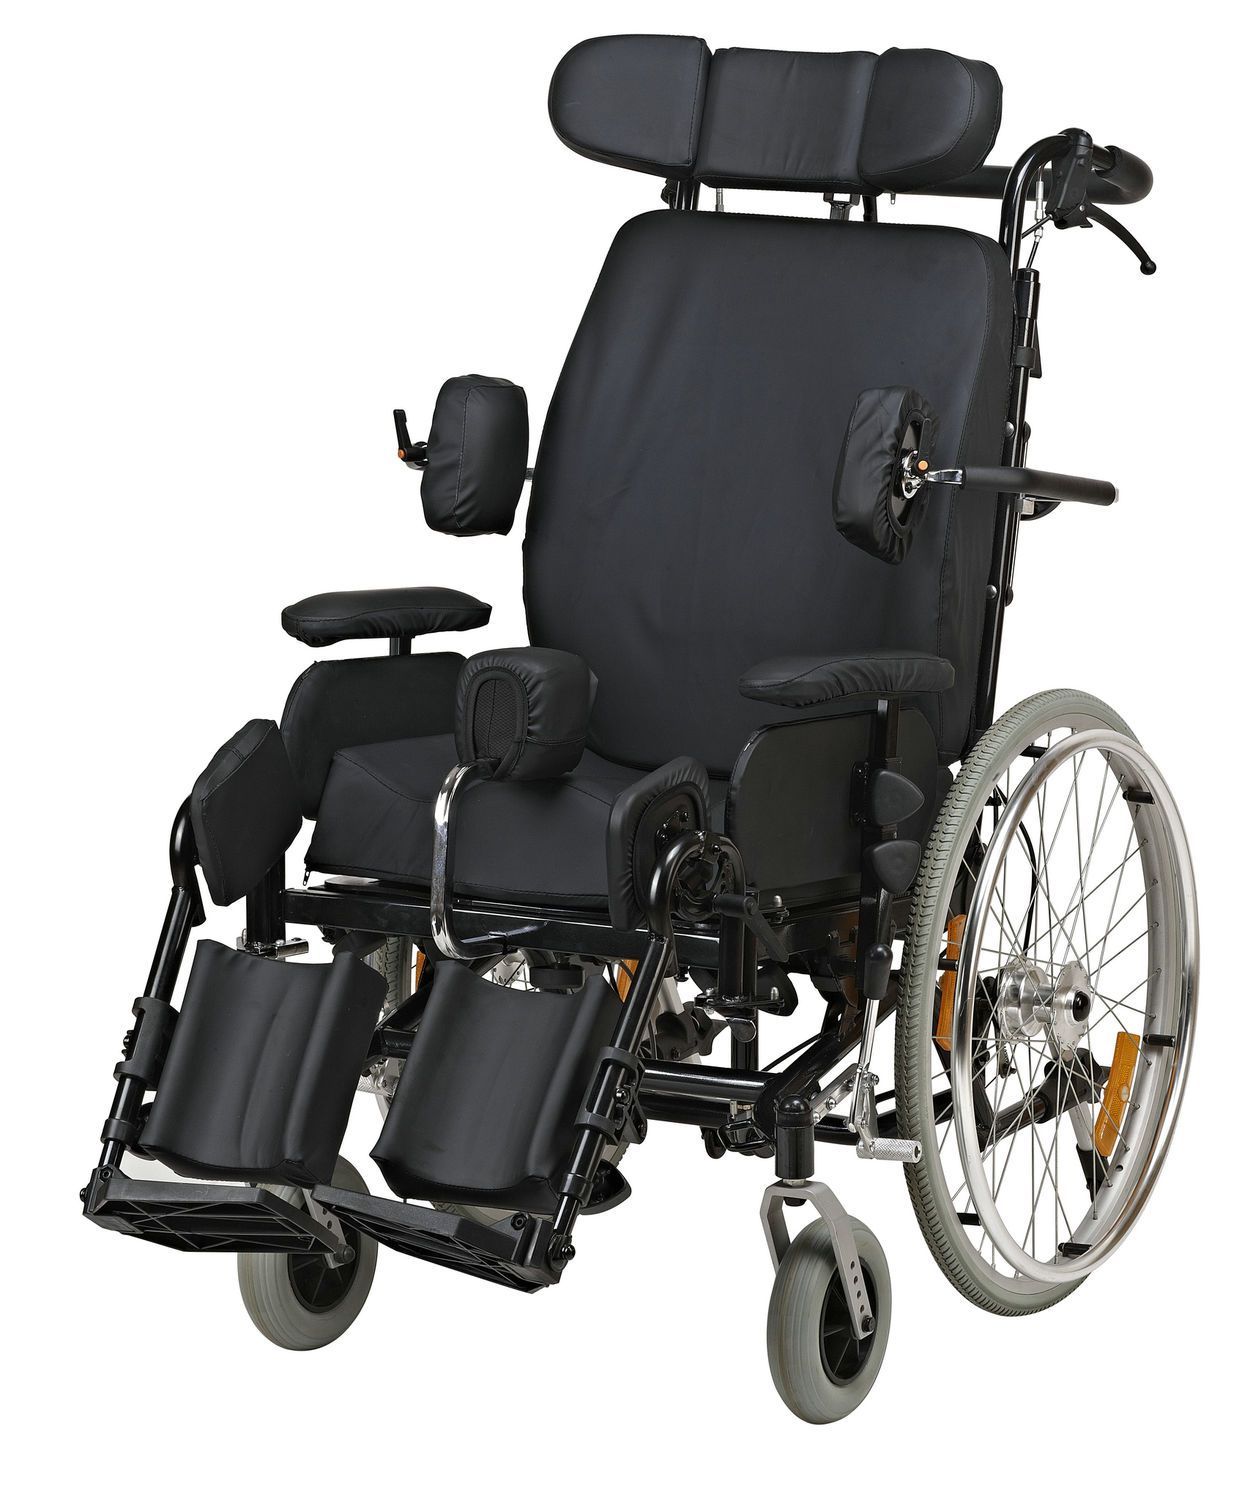 Passive wheelchair / reclining / with legrest / with headrest JY-200 Guangdong Shunde Jaeyong Hardware